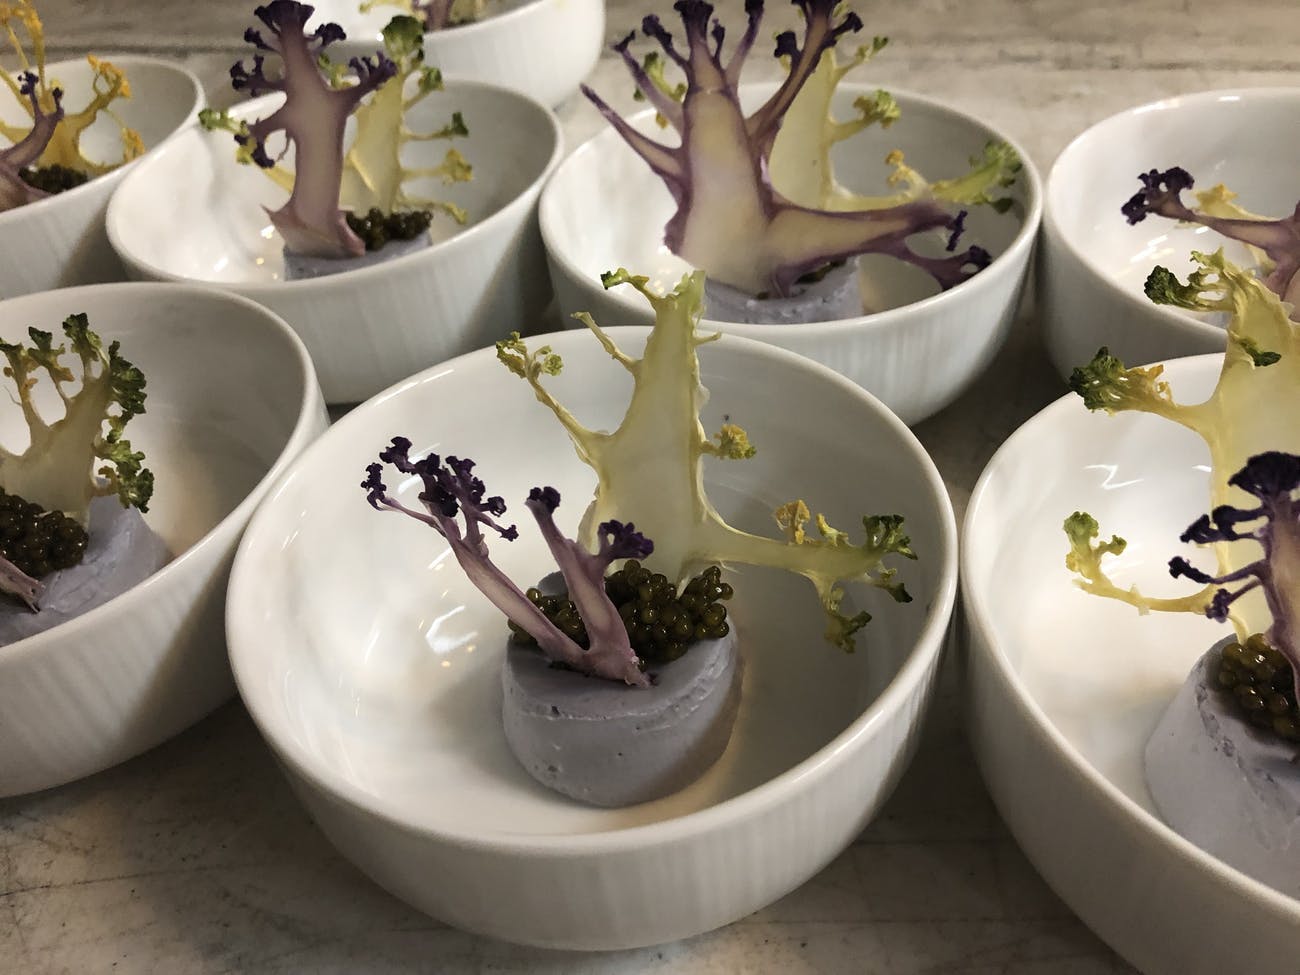 Corporate dinner party with creative and unique broccoli dishes.